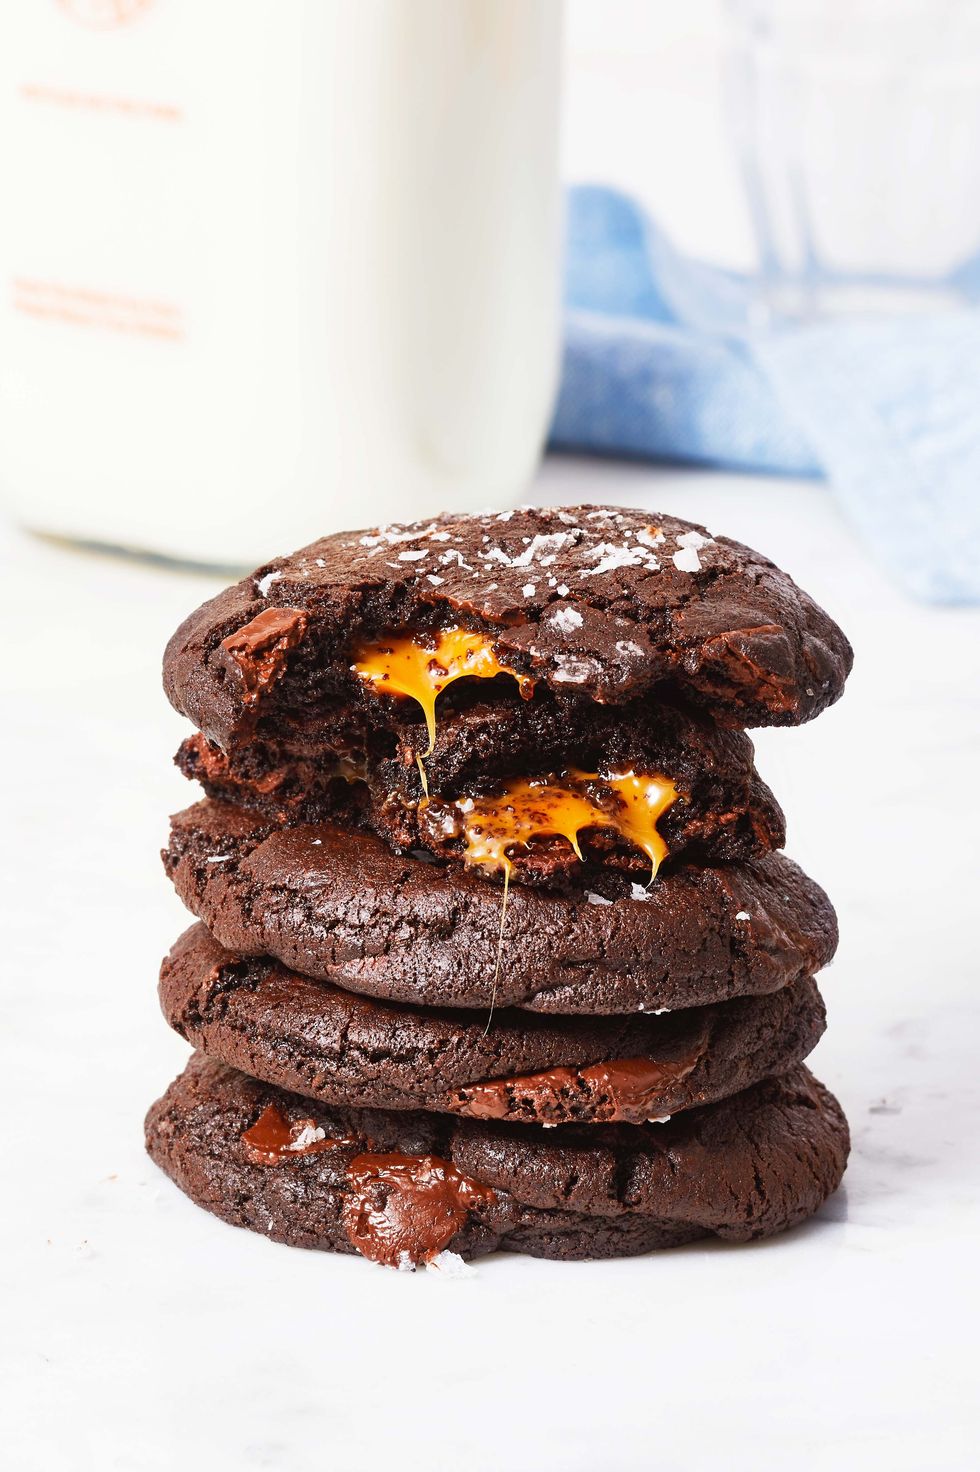 chocolate cookies with a caramel center and salt sprinkled on top